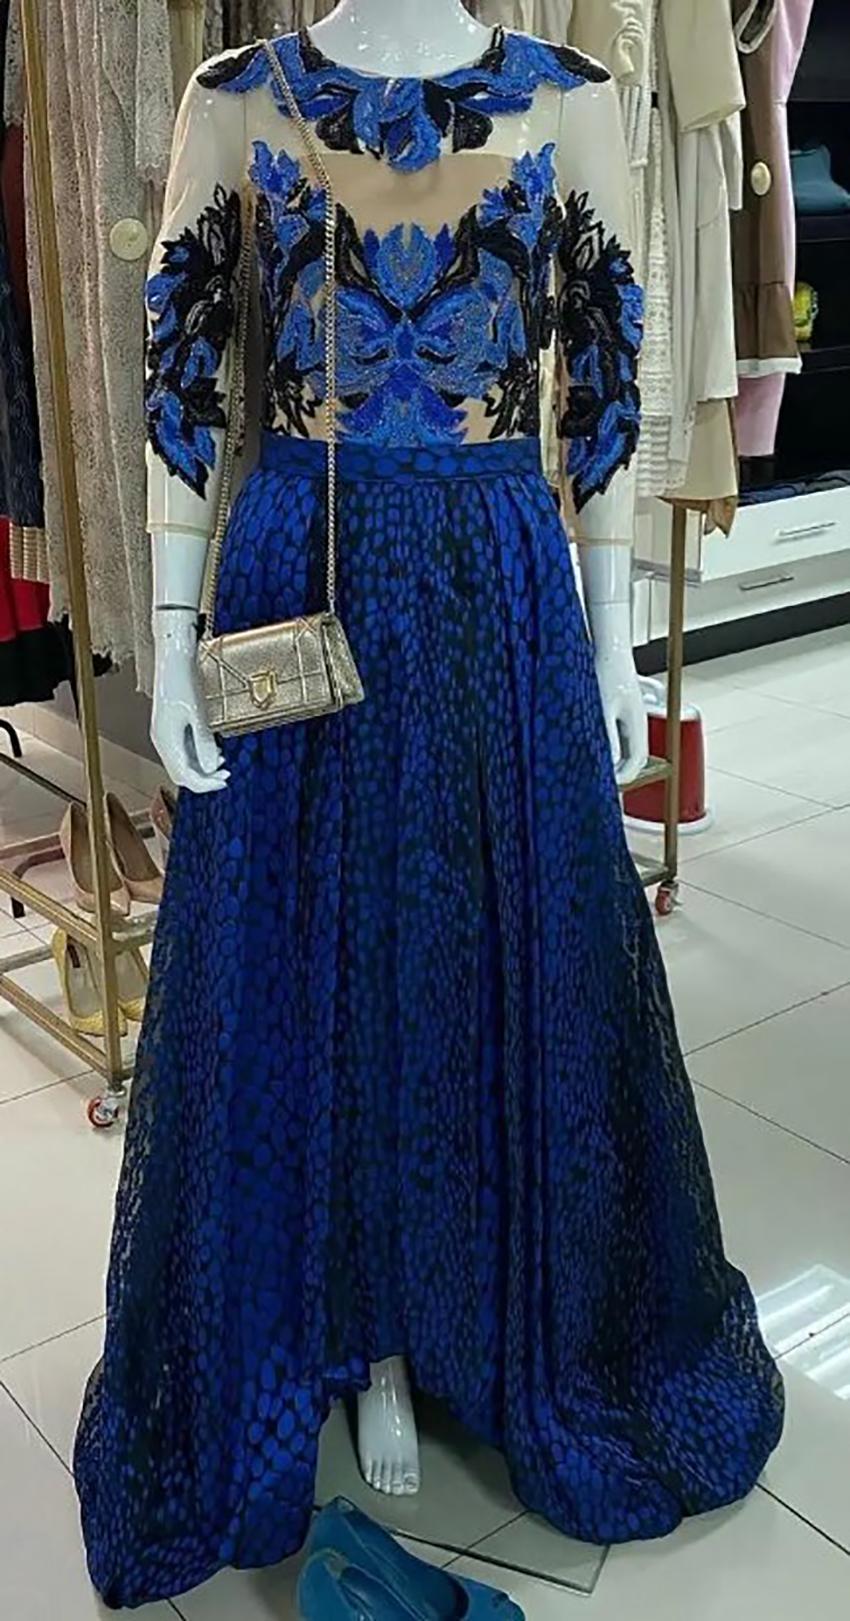 ZUHAIR MURAD 

DARK BLUE LONG EMBROIDERED DRESS

Transparent 3/4 sleeves
Round neckline
Long skirt

Size IT 42 - US 6

Brand new, with tags. 

 100% authentic guarantee 

       PLEASE VISIT OUR STORE FOR MORE GREAT ITEMS  



os

 